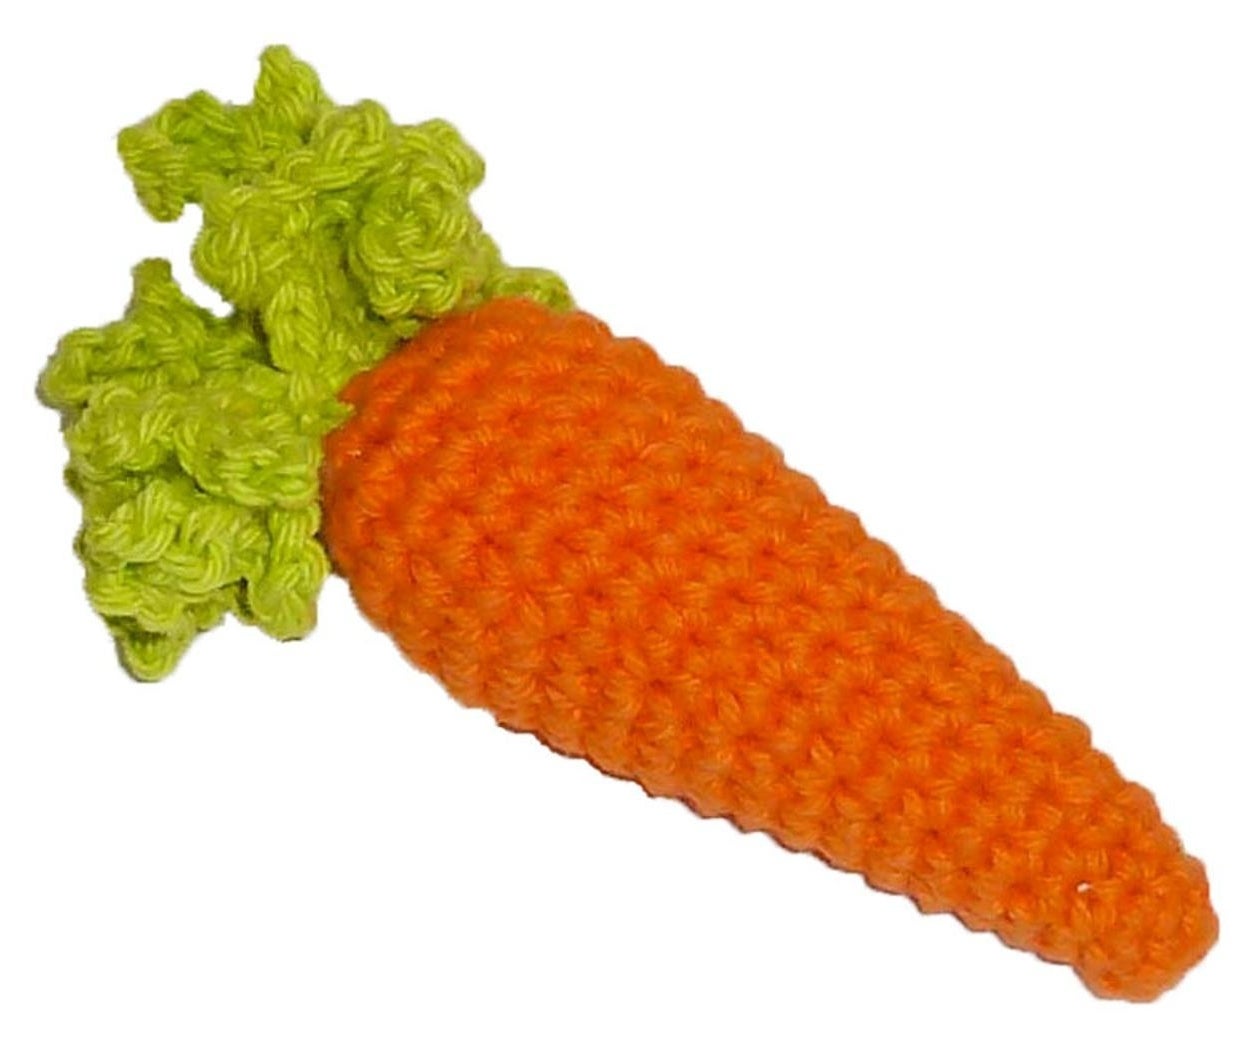 The toy shaped like a carrot